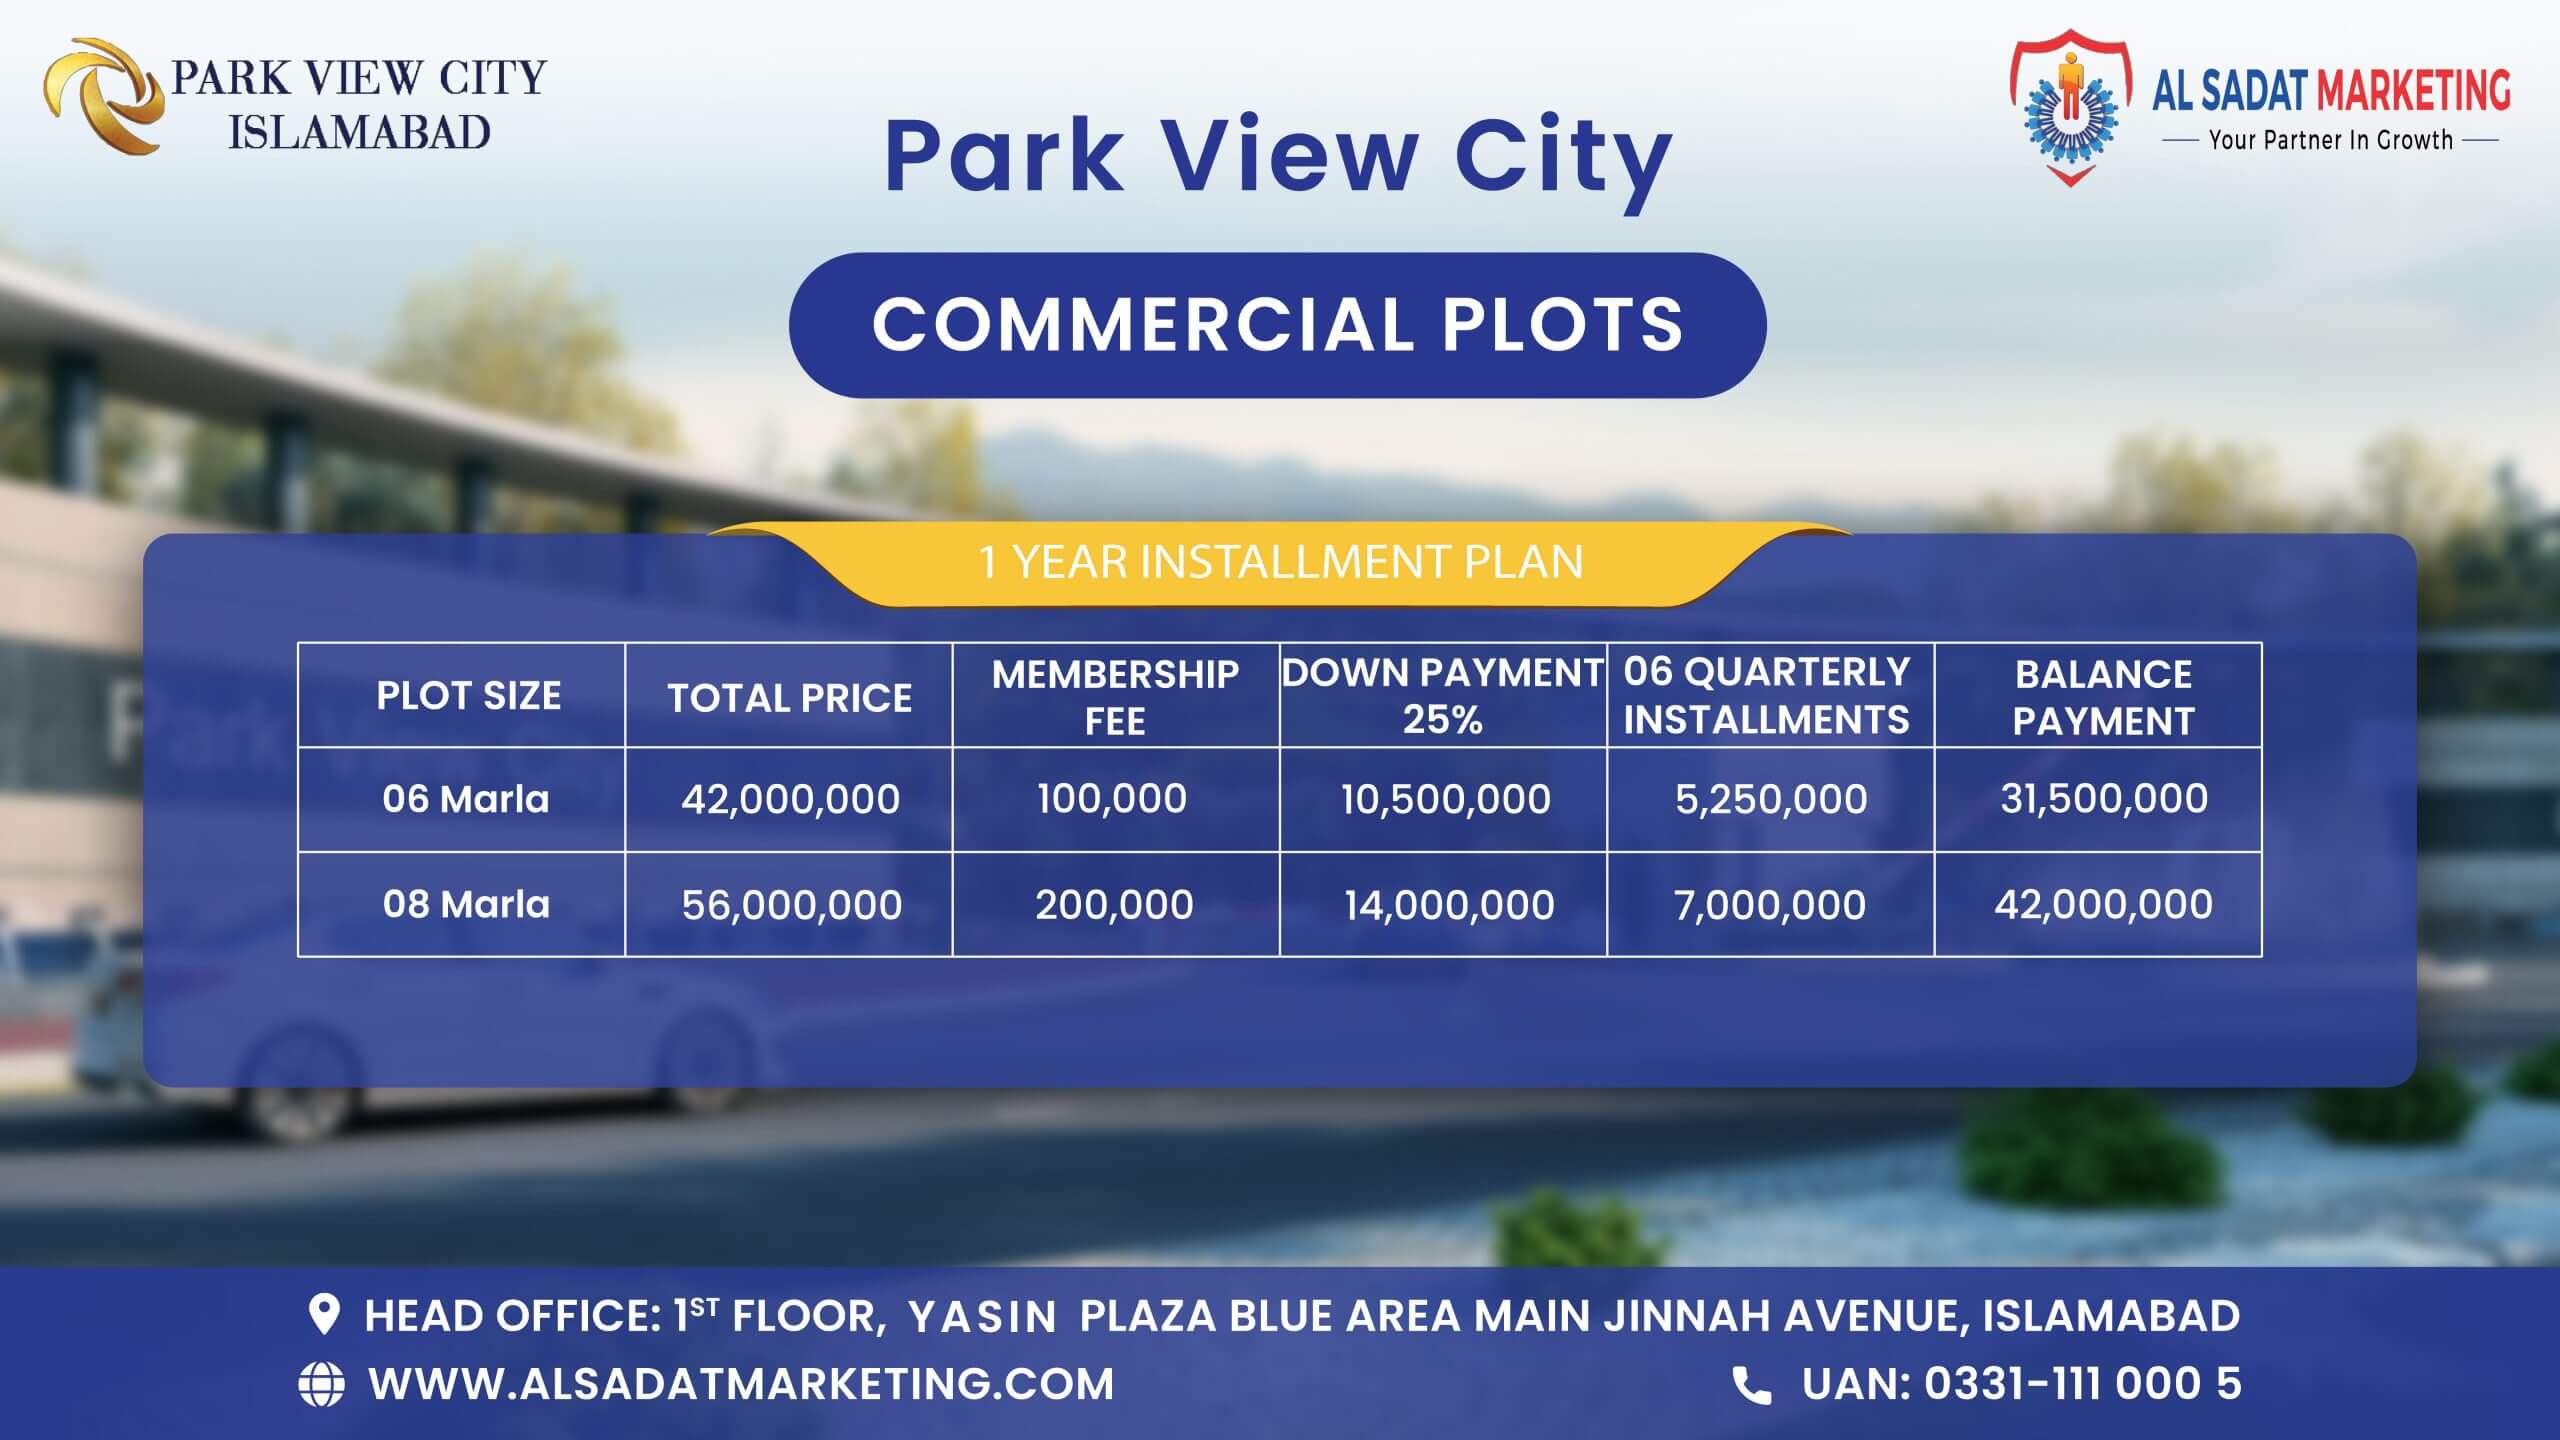 park view city islamabad commercial plots payment plan - park view city commercial plots payment plan - park view city islamabad payment plan - park view city payment plan - payment plan of park view city islamabad – payment plan of park view city – park view city islamabad – park view city – park view city housing society - park view city islamabad housing society – park view city real estate project - park view city islamabad real estate project - al sadat marketing - alsadat marketing - al-sadat marketing